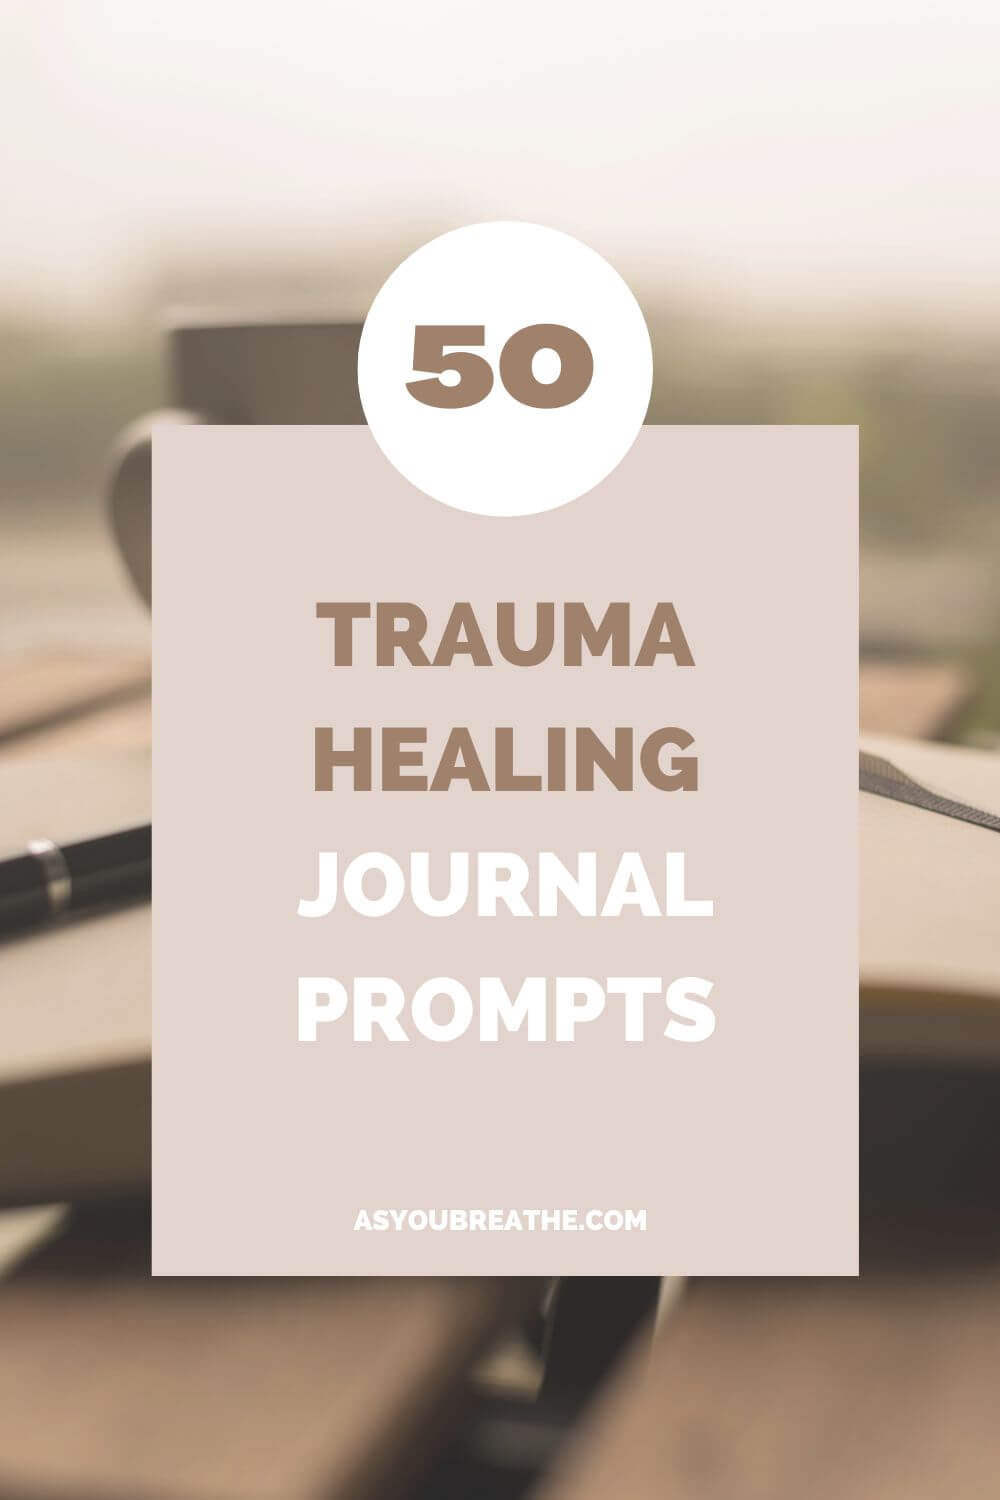 50 Journal Prompts for Healing Trauma